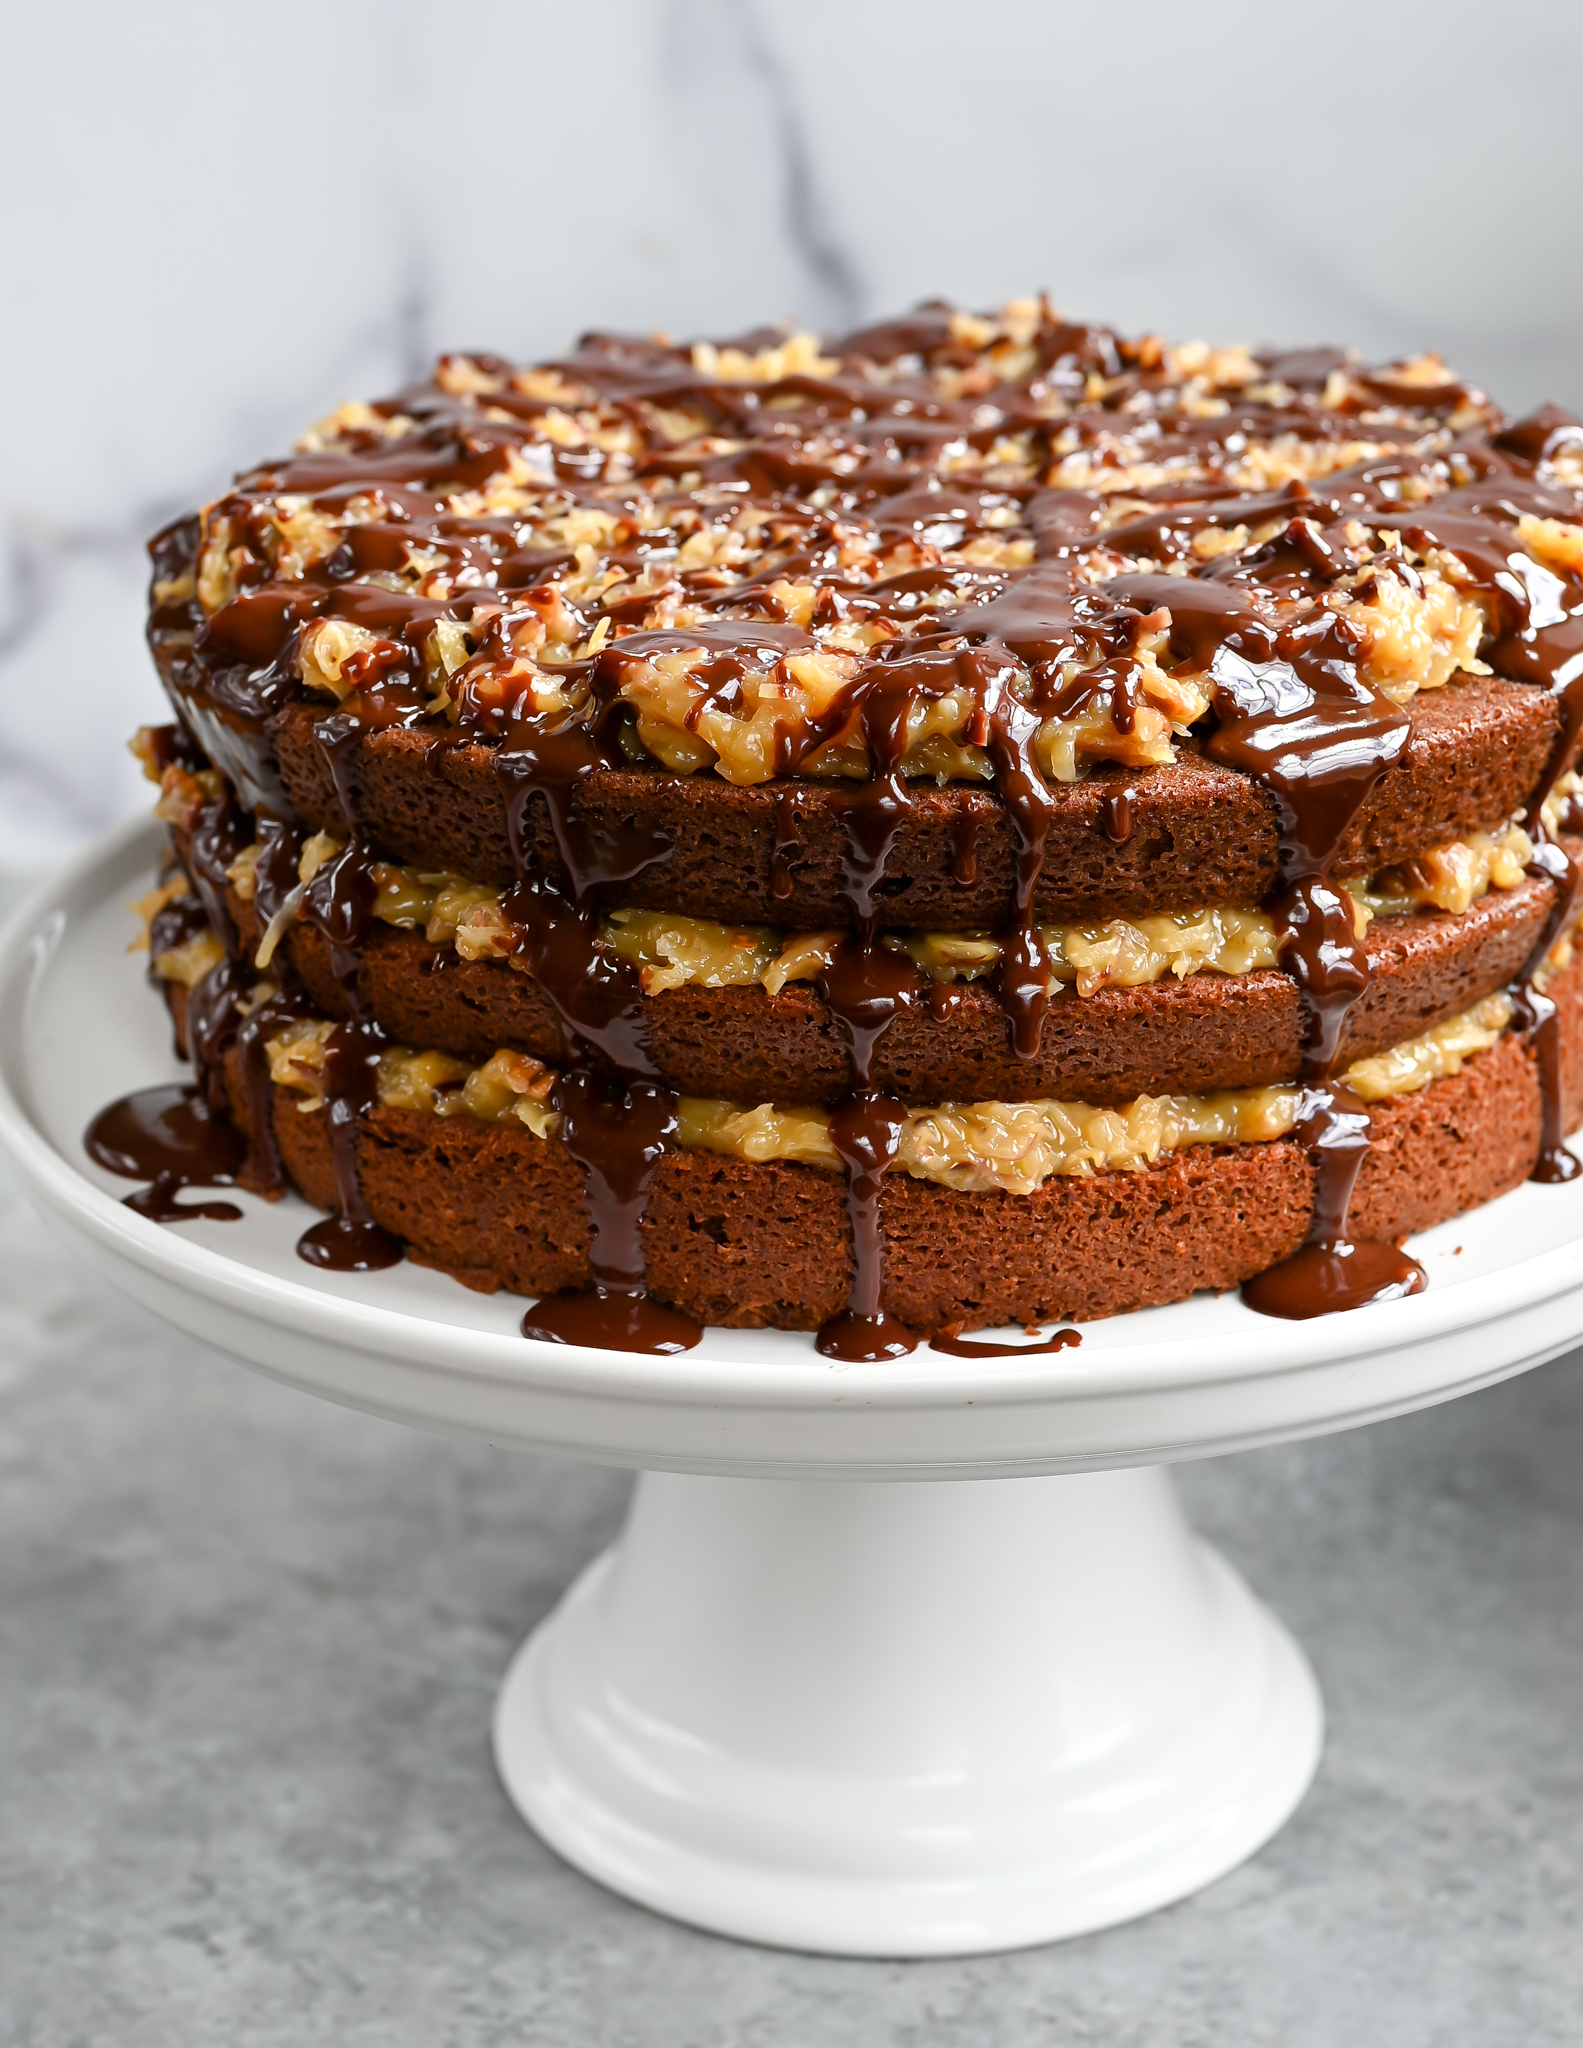 12 Types of Cake to Add to Your Baking Repertoire | Epicurious